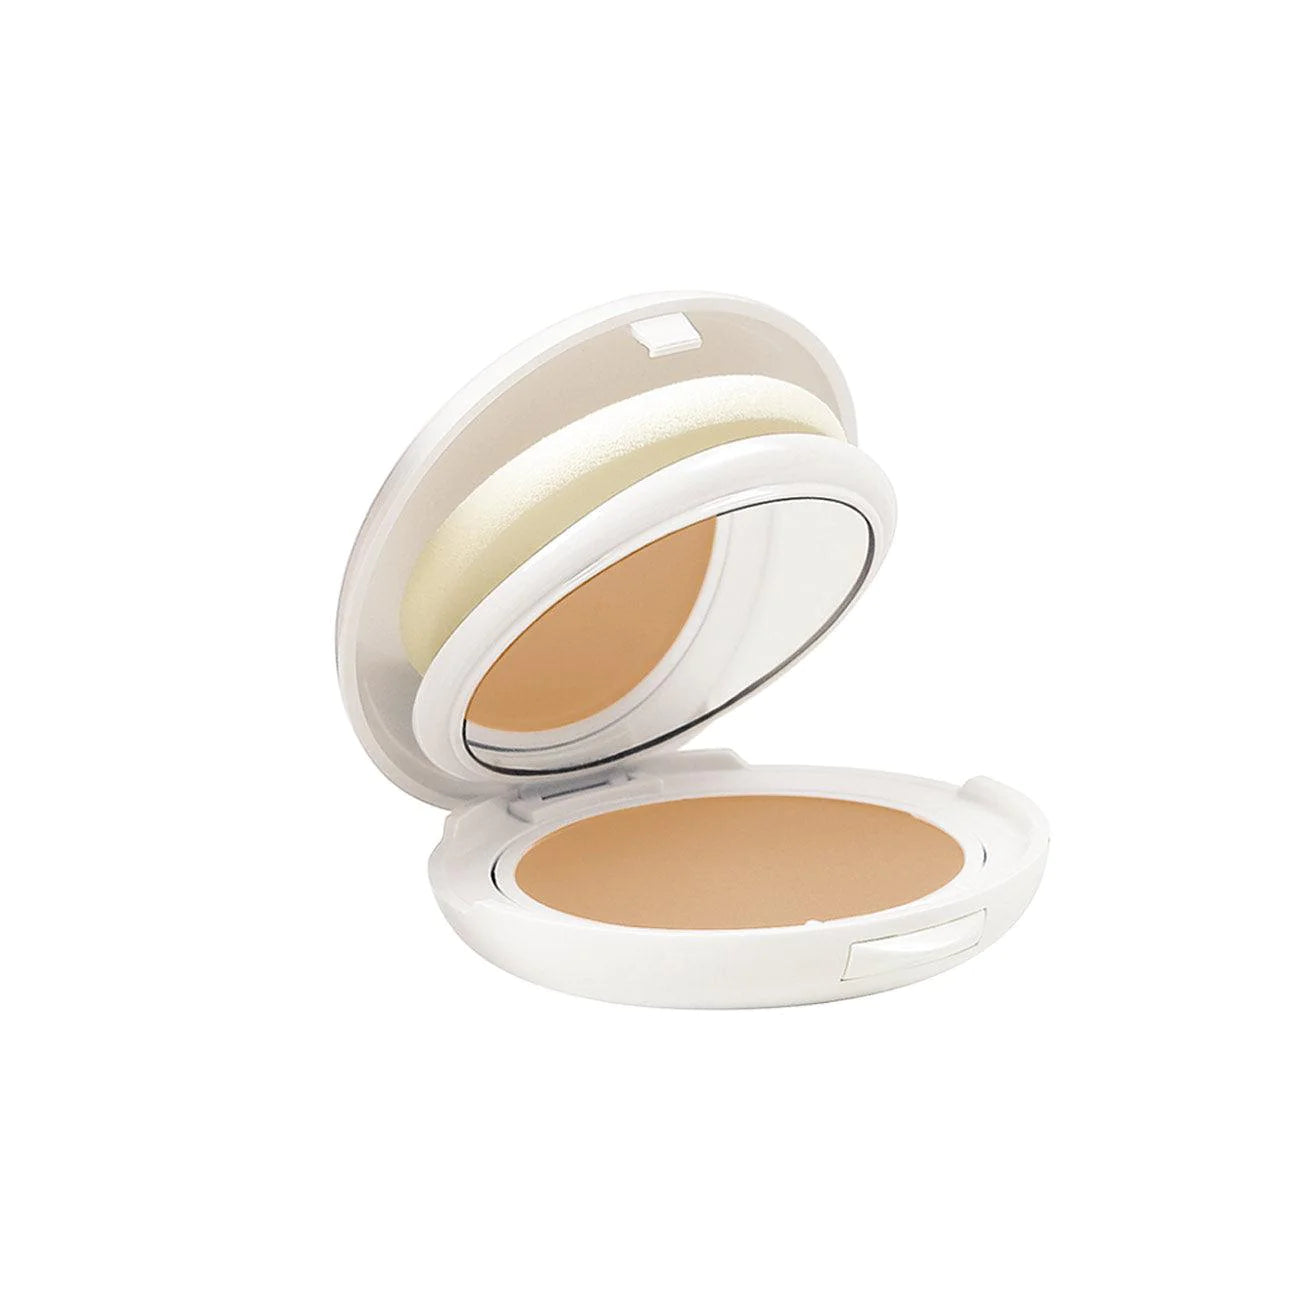 AVÈNE Couvrance Compact Foundation Cream SPF30 - Normal to Combination Sensitive Skin